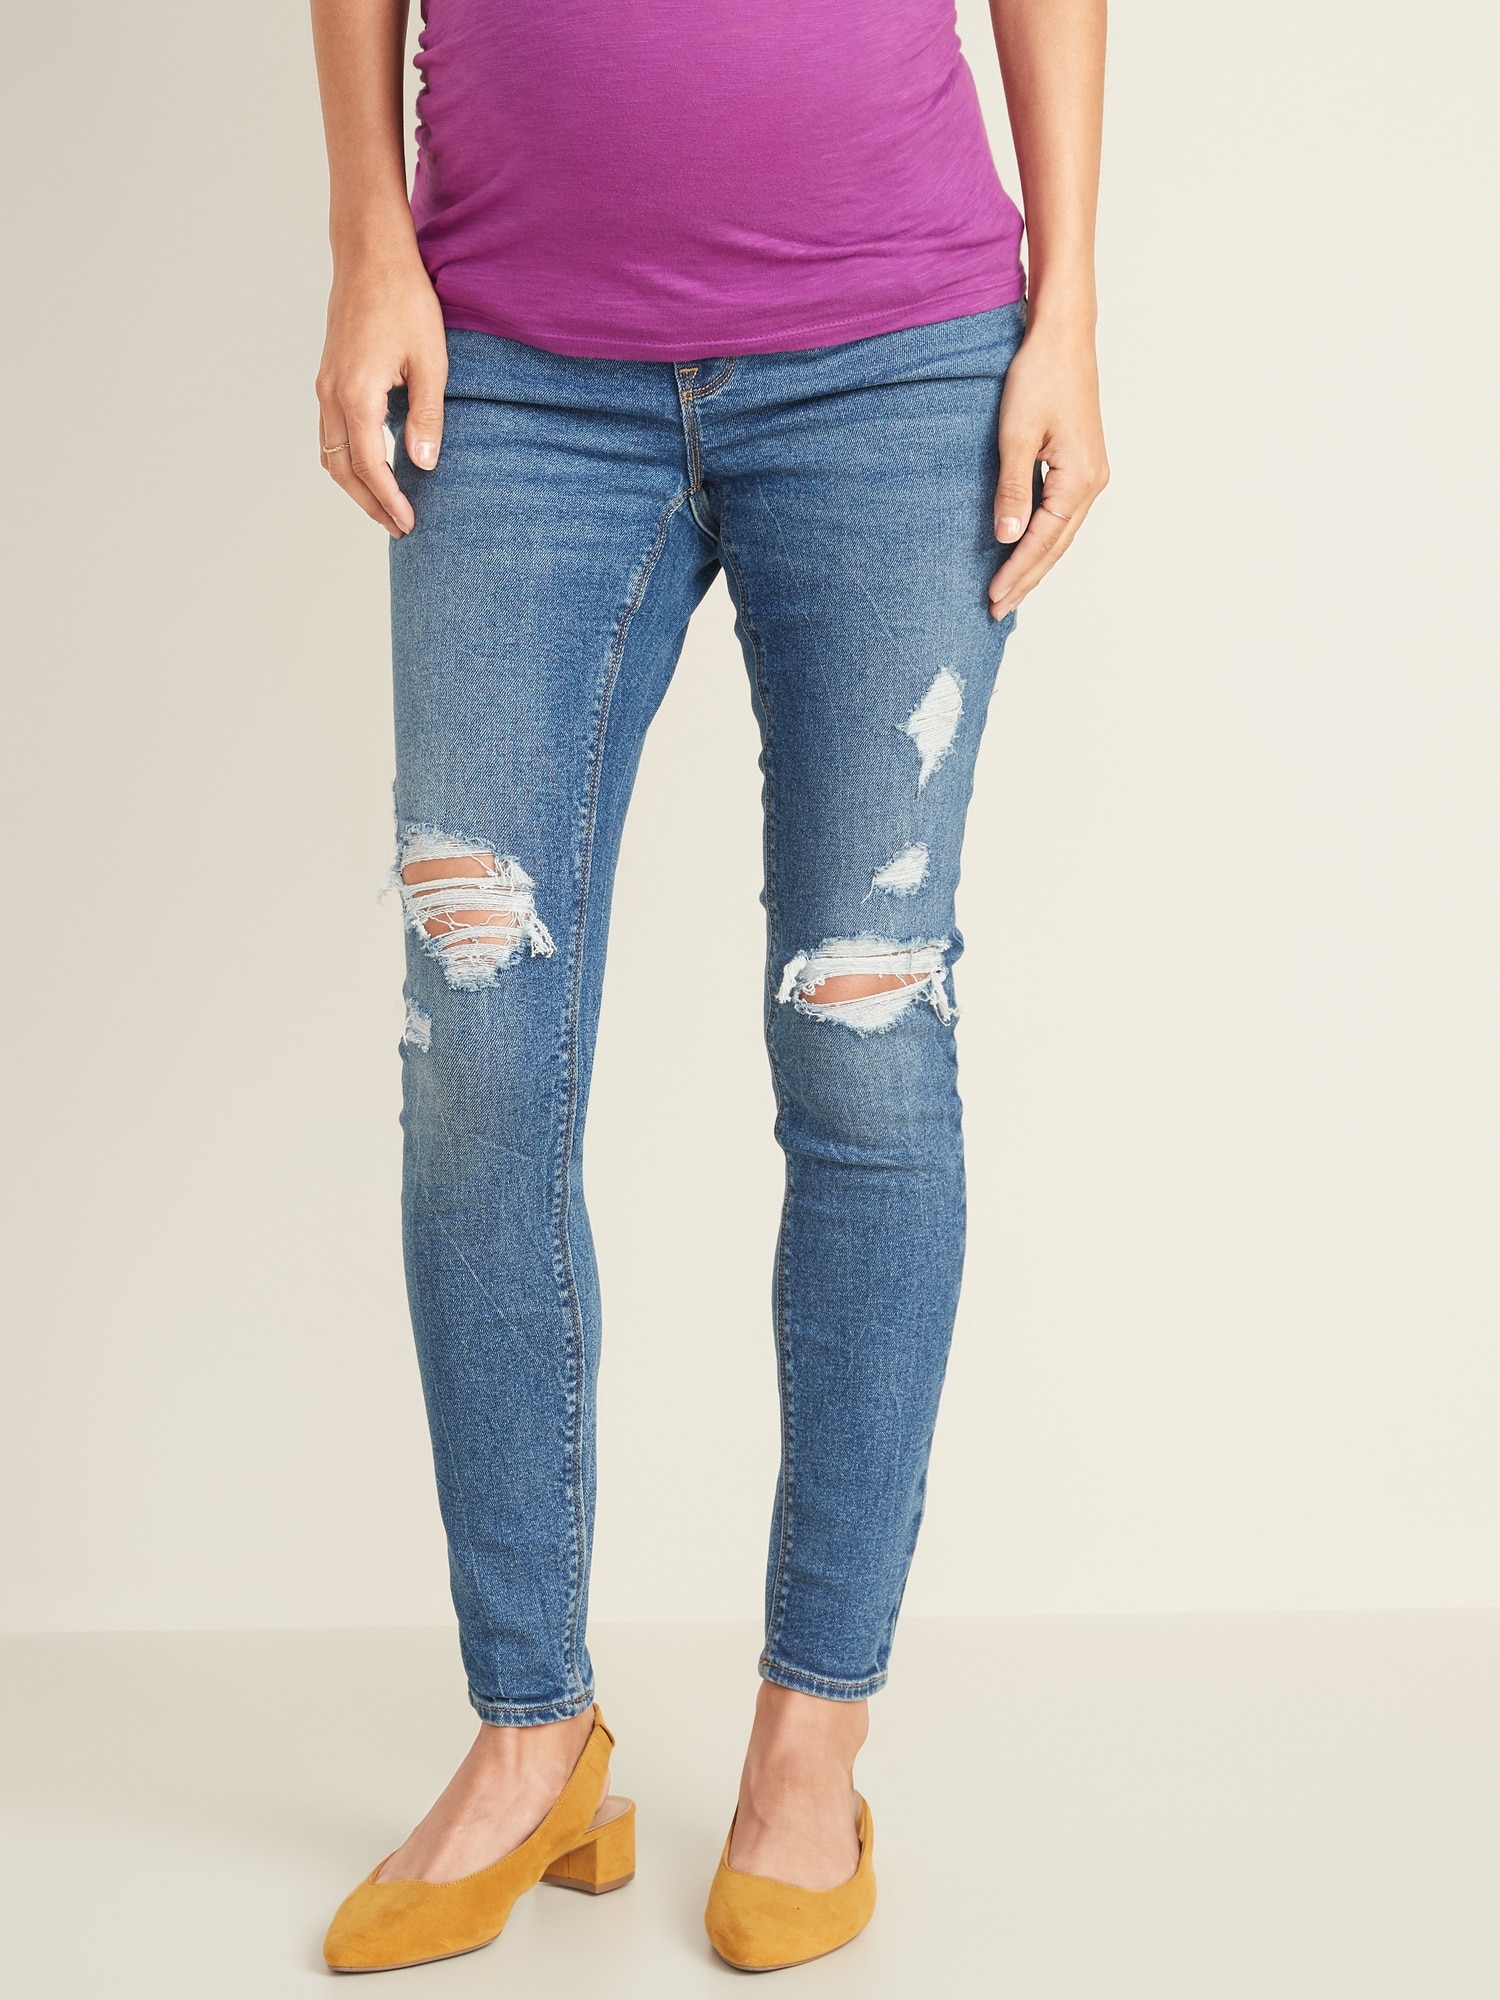 rockstar jeans from old navy